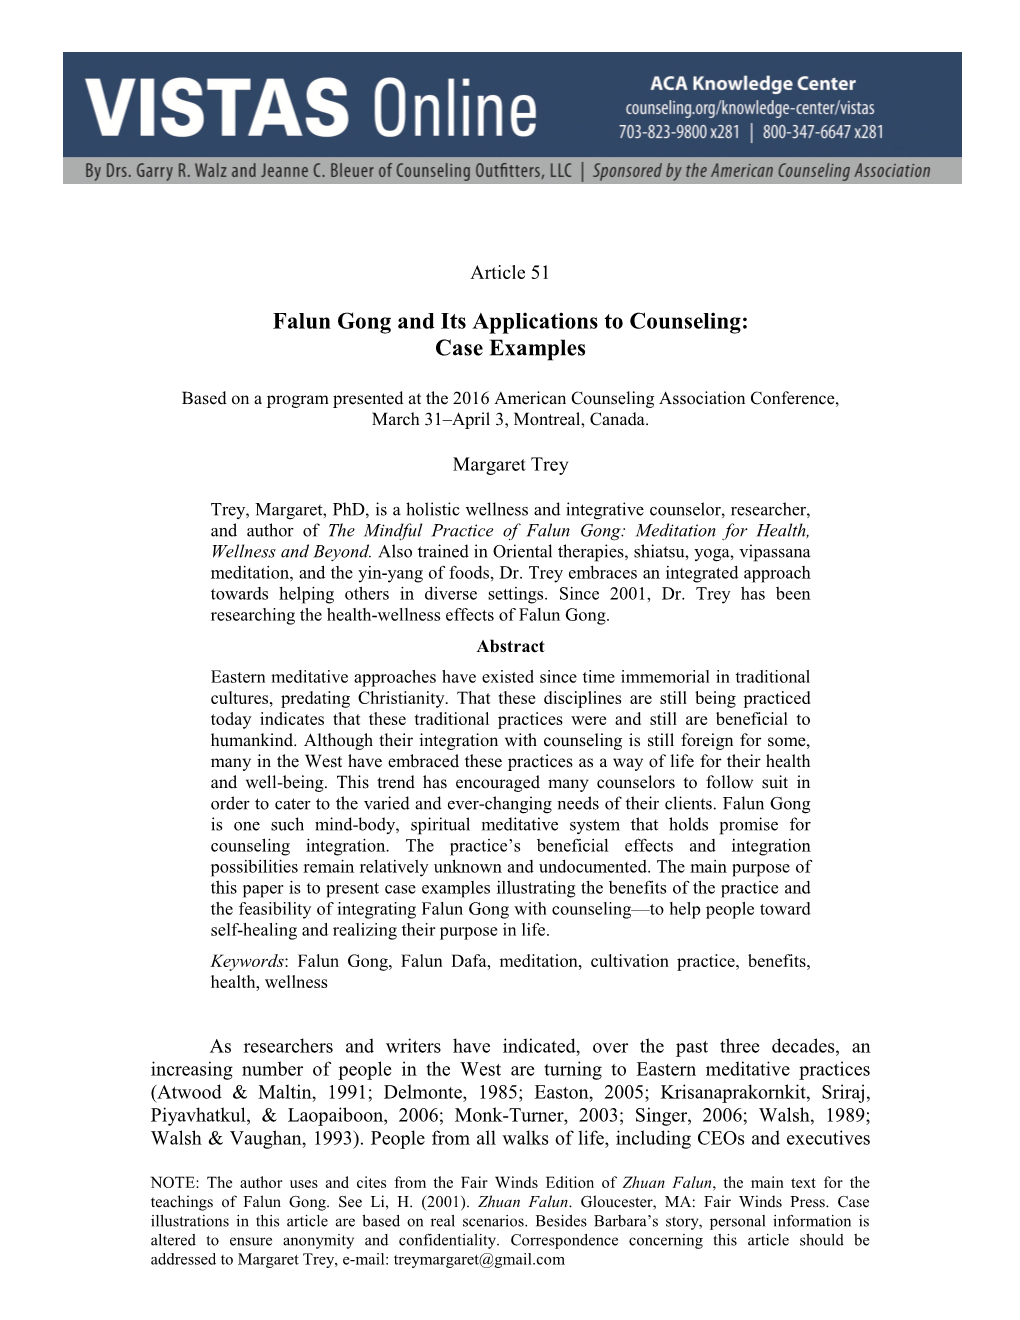 Falun Gong and Its Applications to Counseling: Case Examples